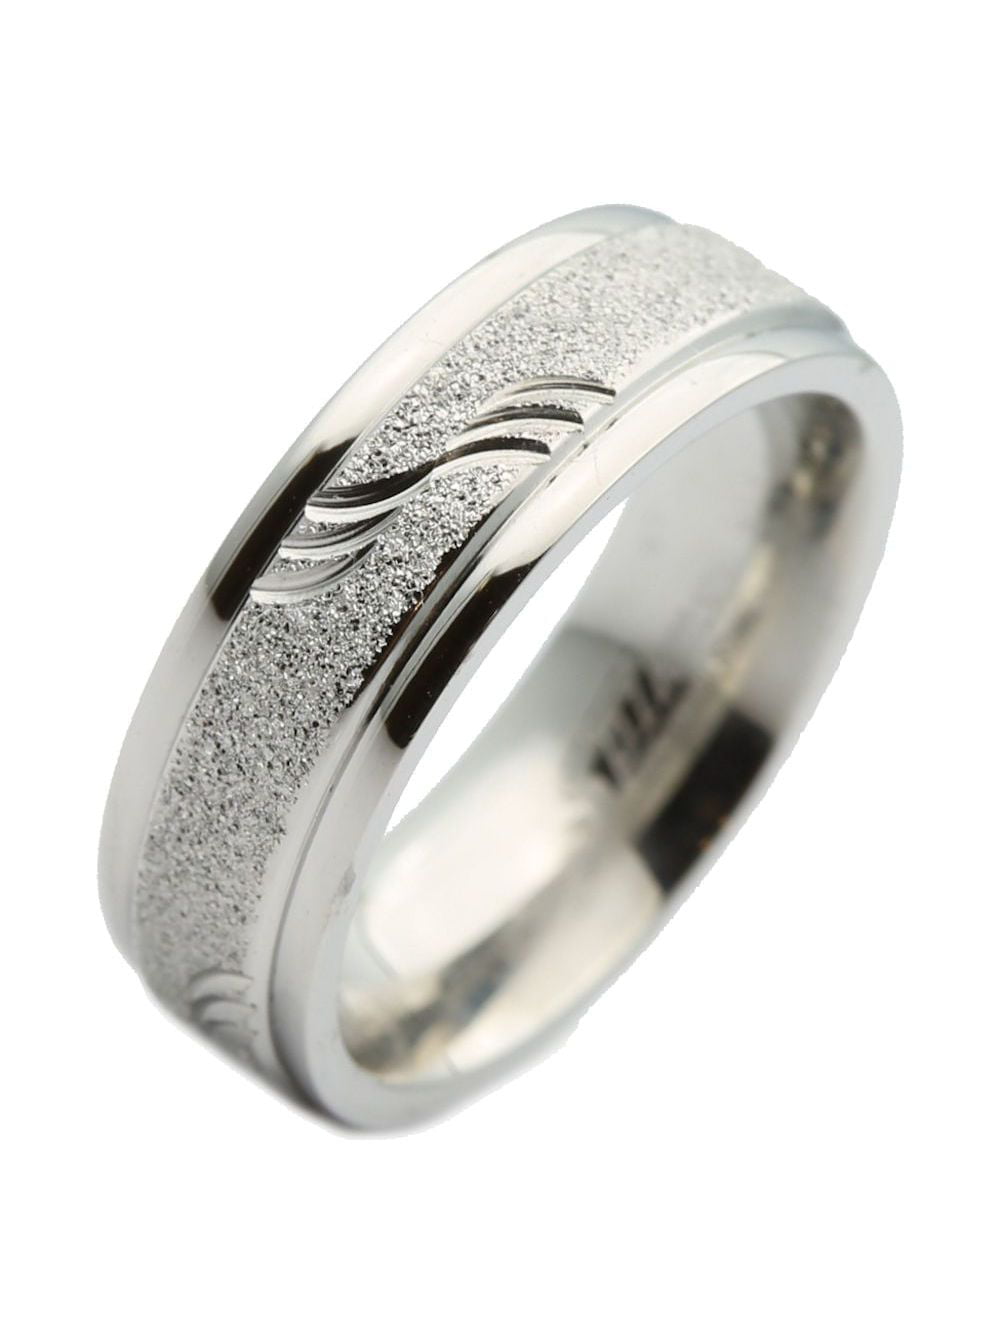 4mm Stainless Steel Grooved Star Design Anniversary Band Engagement Ring 6mm